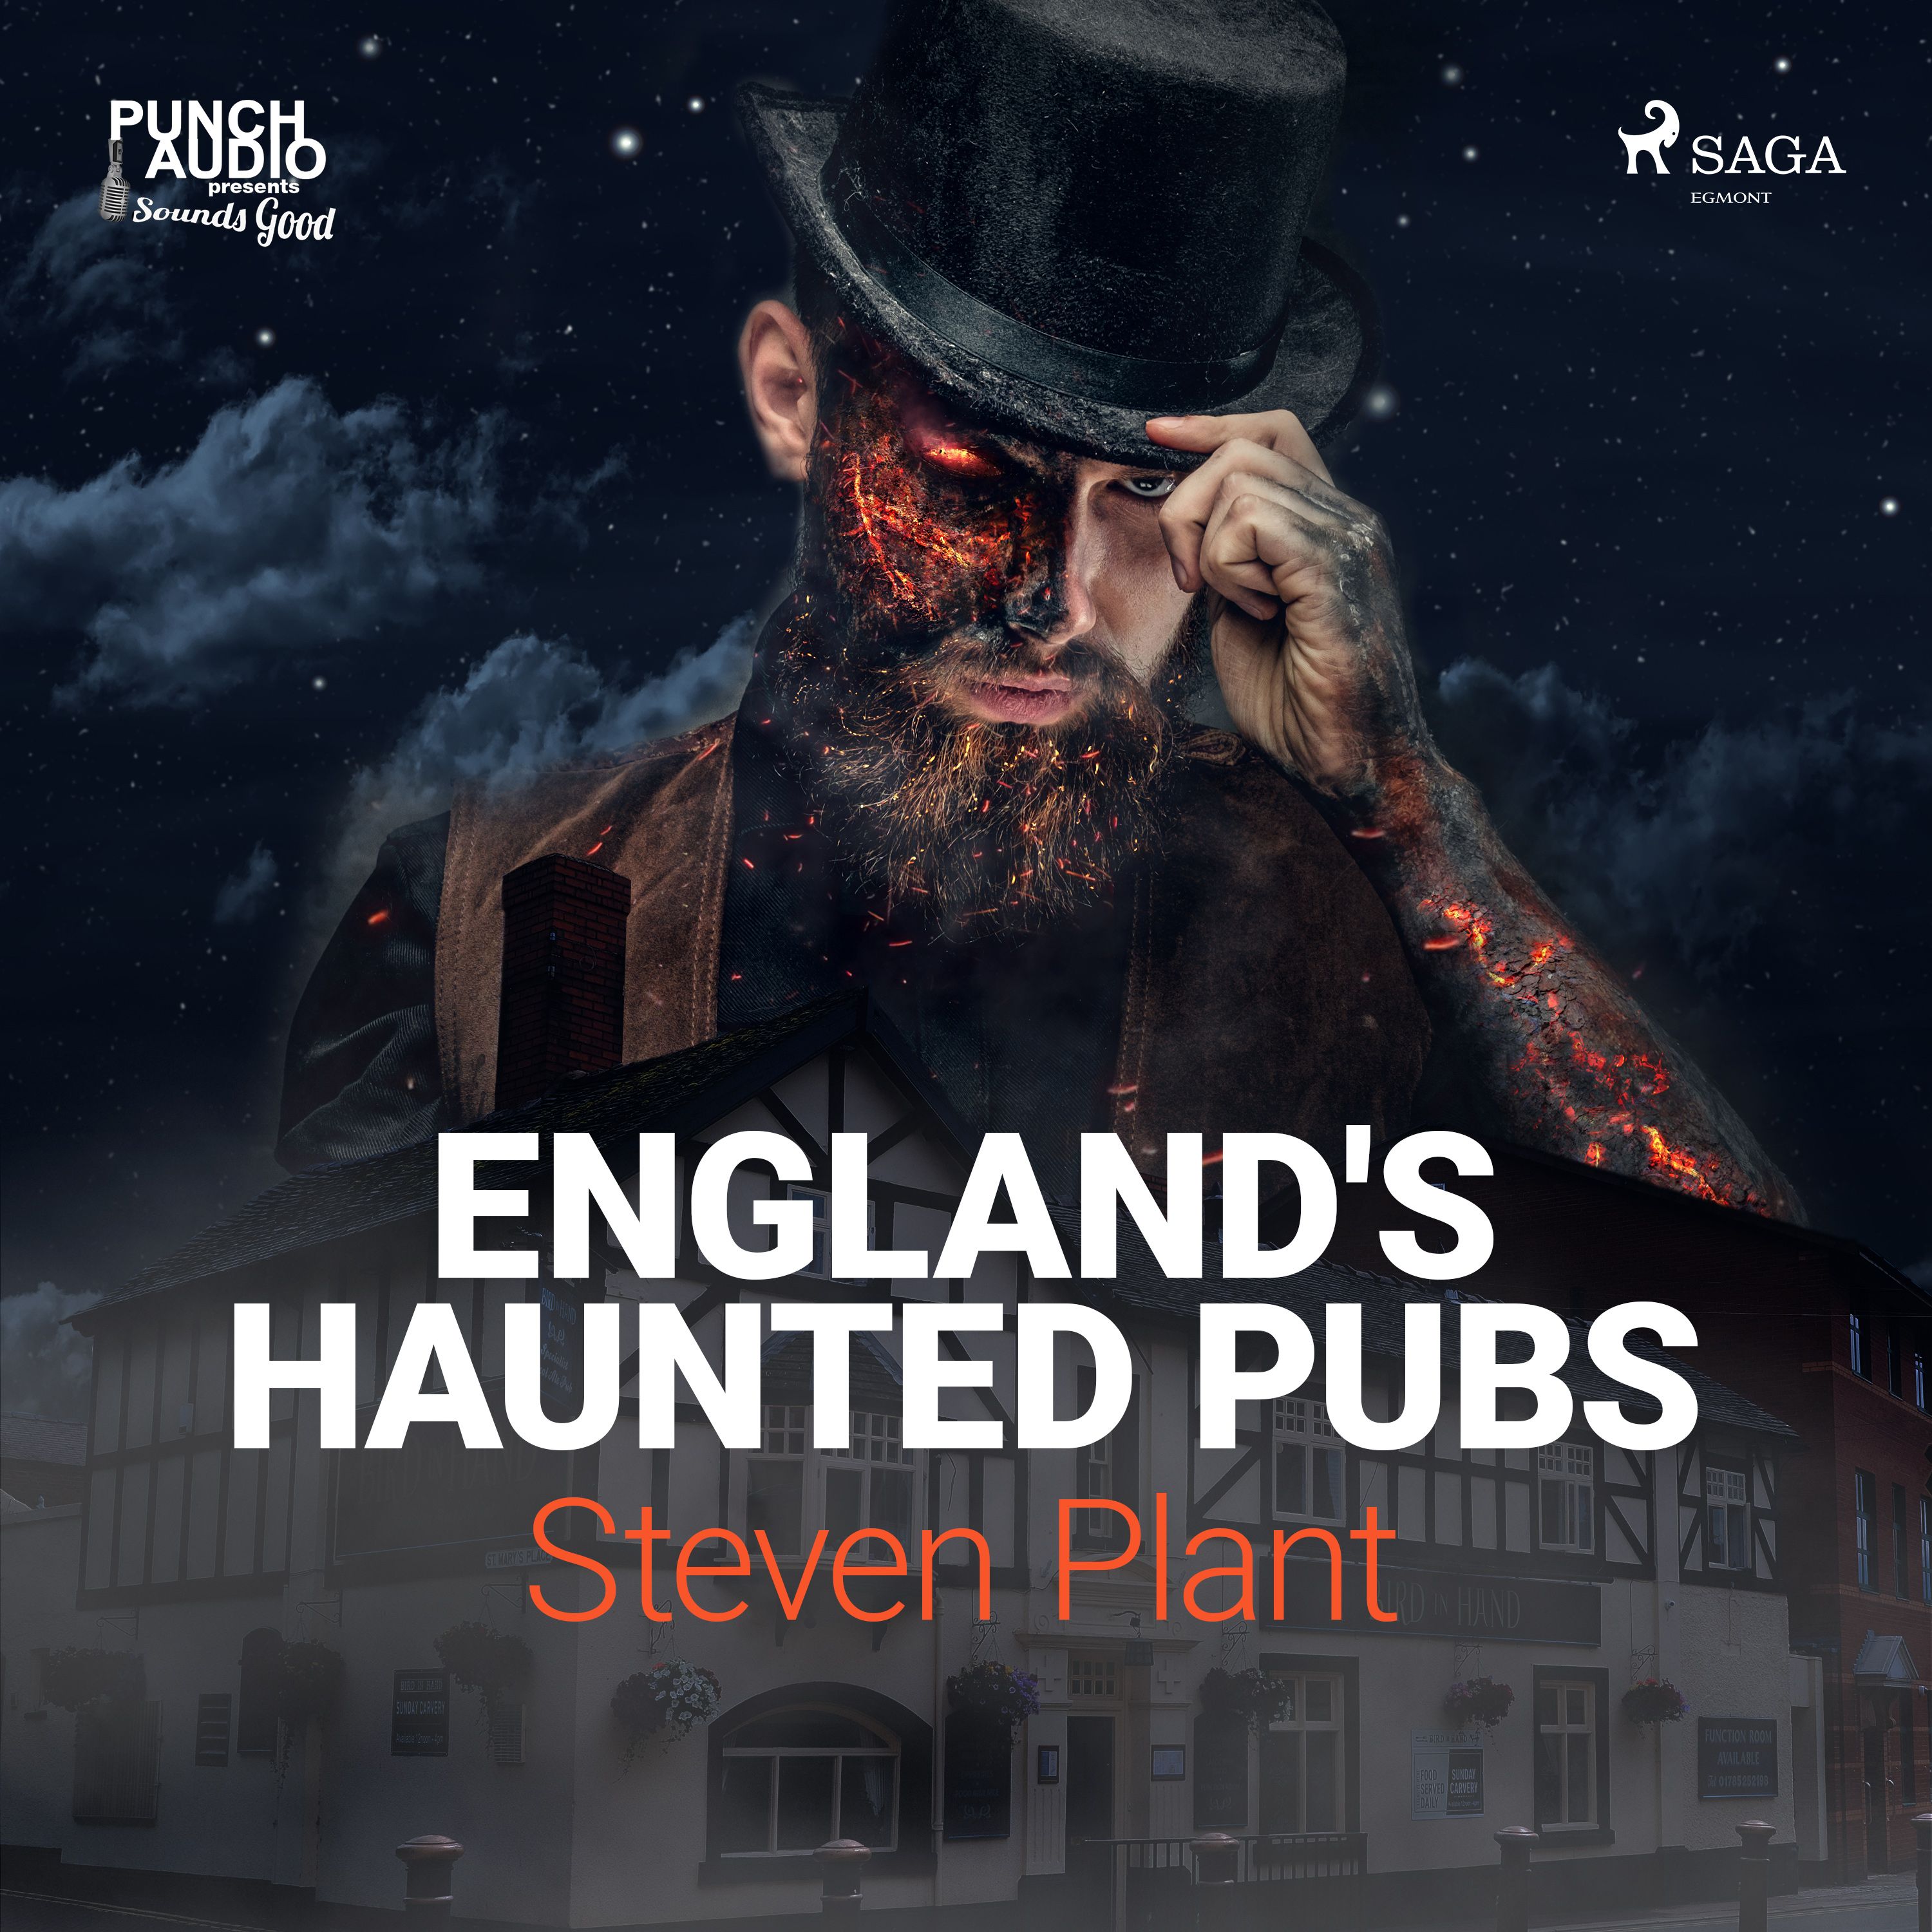 England's Haunted Pubs, audiobook by Steven Plant